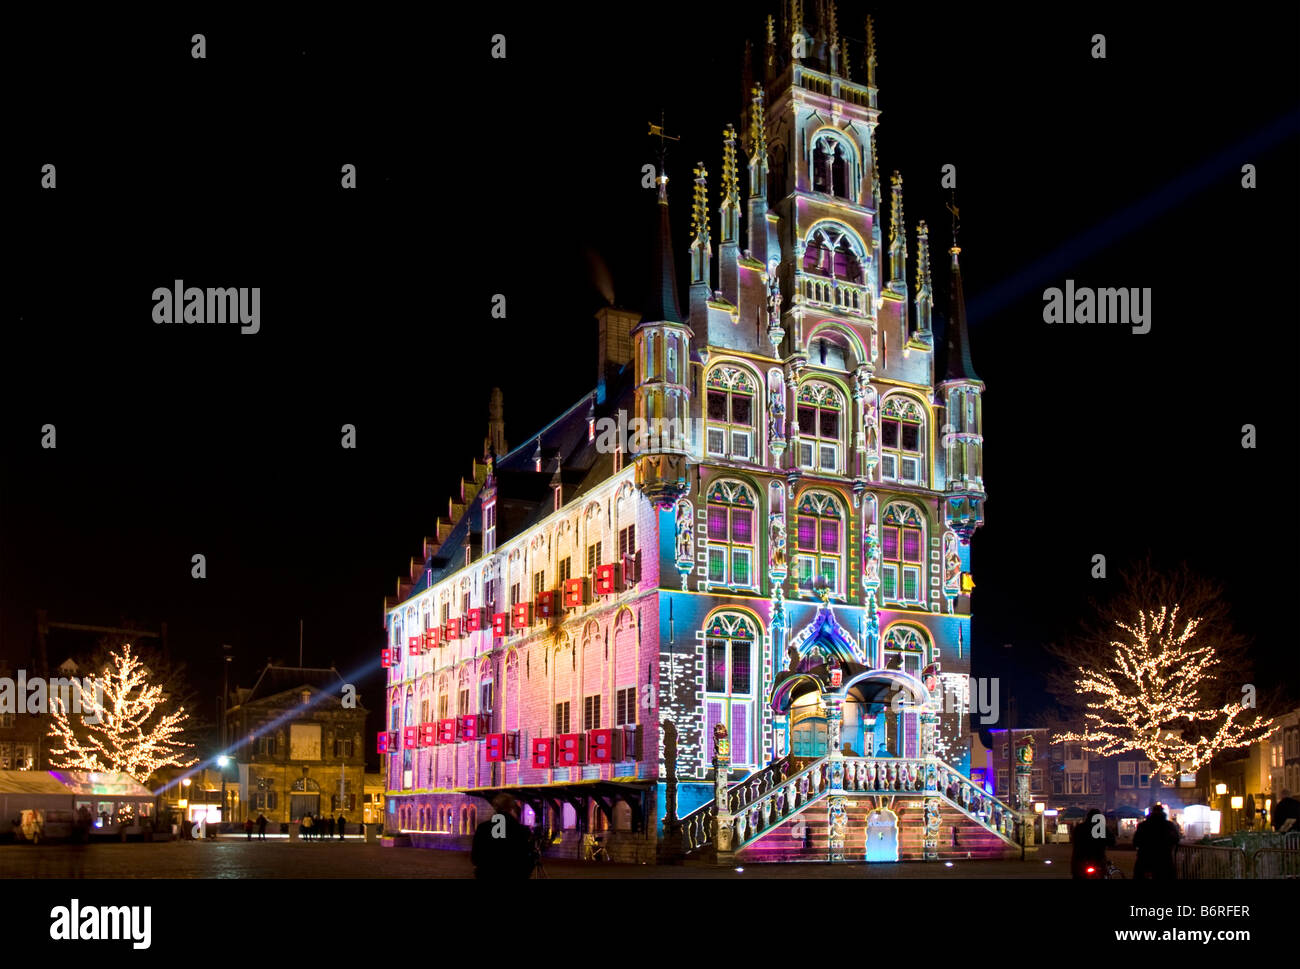 Town hall in Polychromatic Light Projection by French Artist Patrice Warrener. Market Square, Gouda, The Netherlands Stock Photo